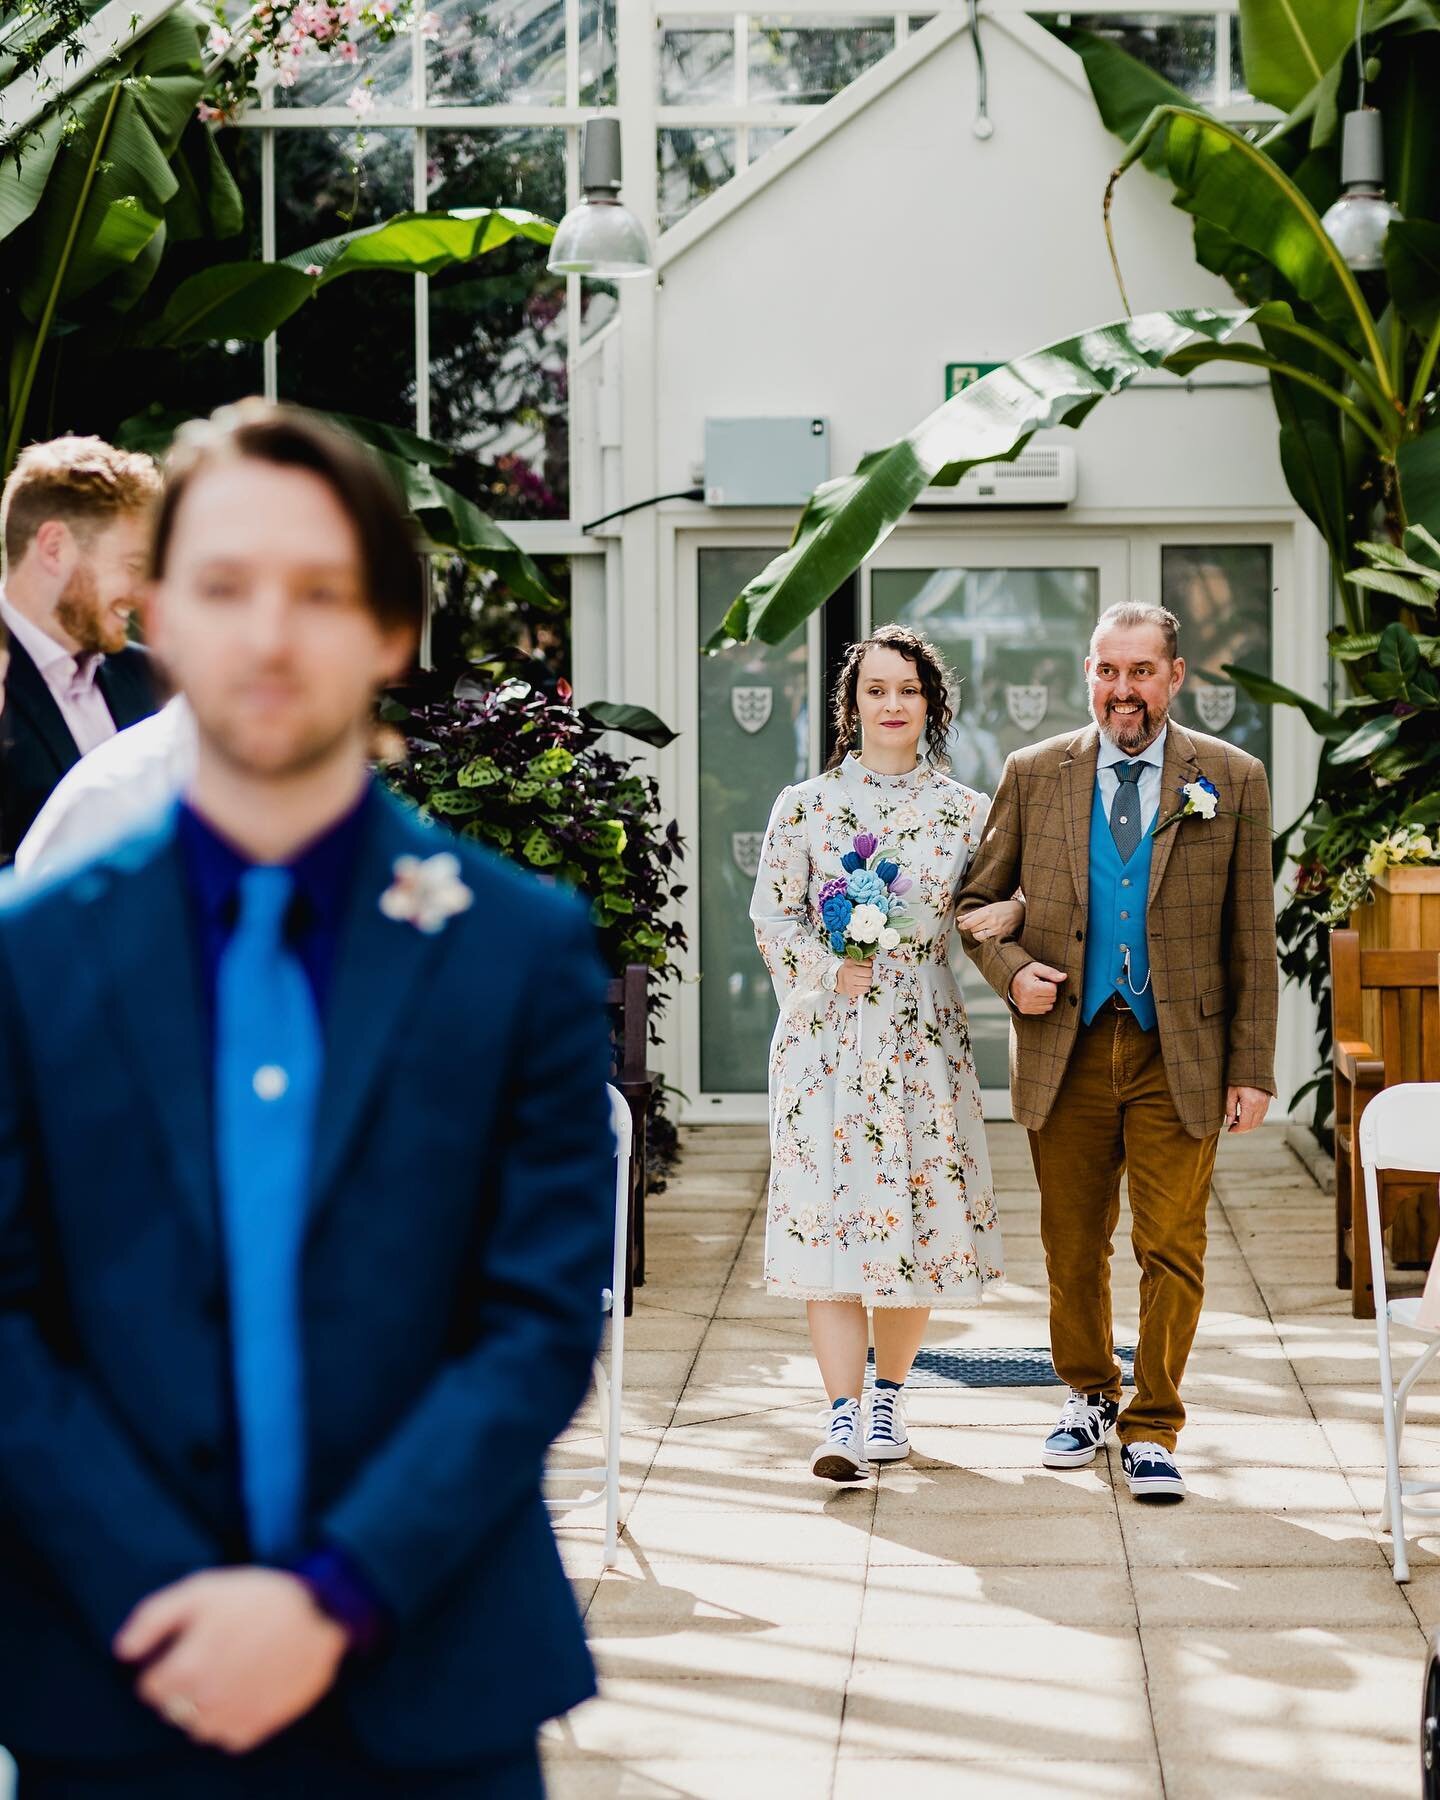 Did you know that the Pearson Park Conservatory is now available for weddings? 🌿 Say 'I do' surrounded by stunning greenery. The conservatory serves as the perfect backdrop for your special day!

Take a look at some images from Em &amp; Josh's weddi